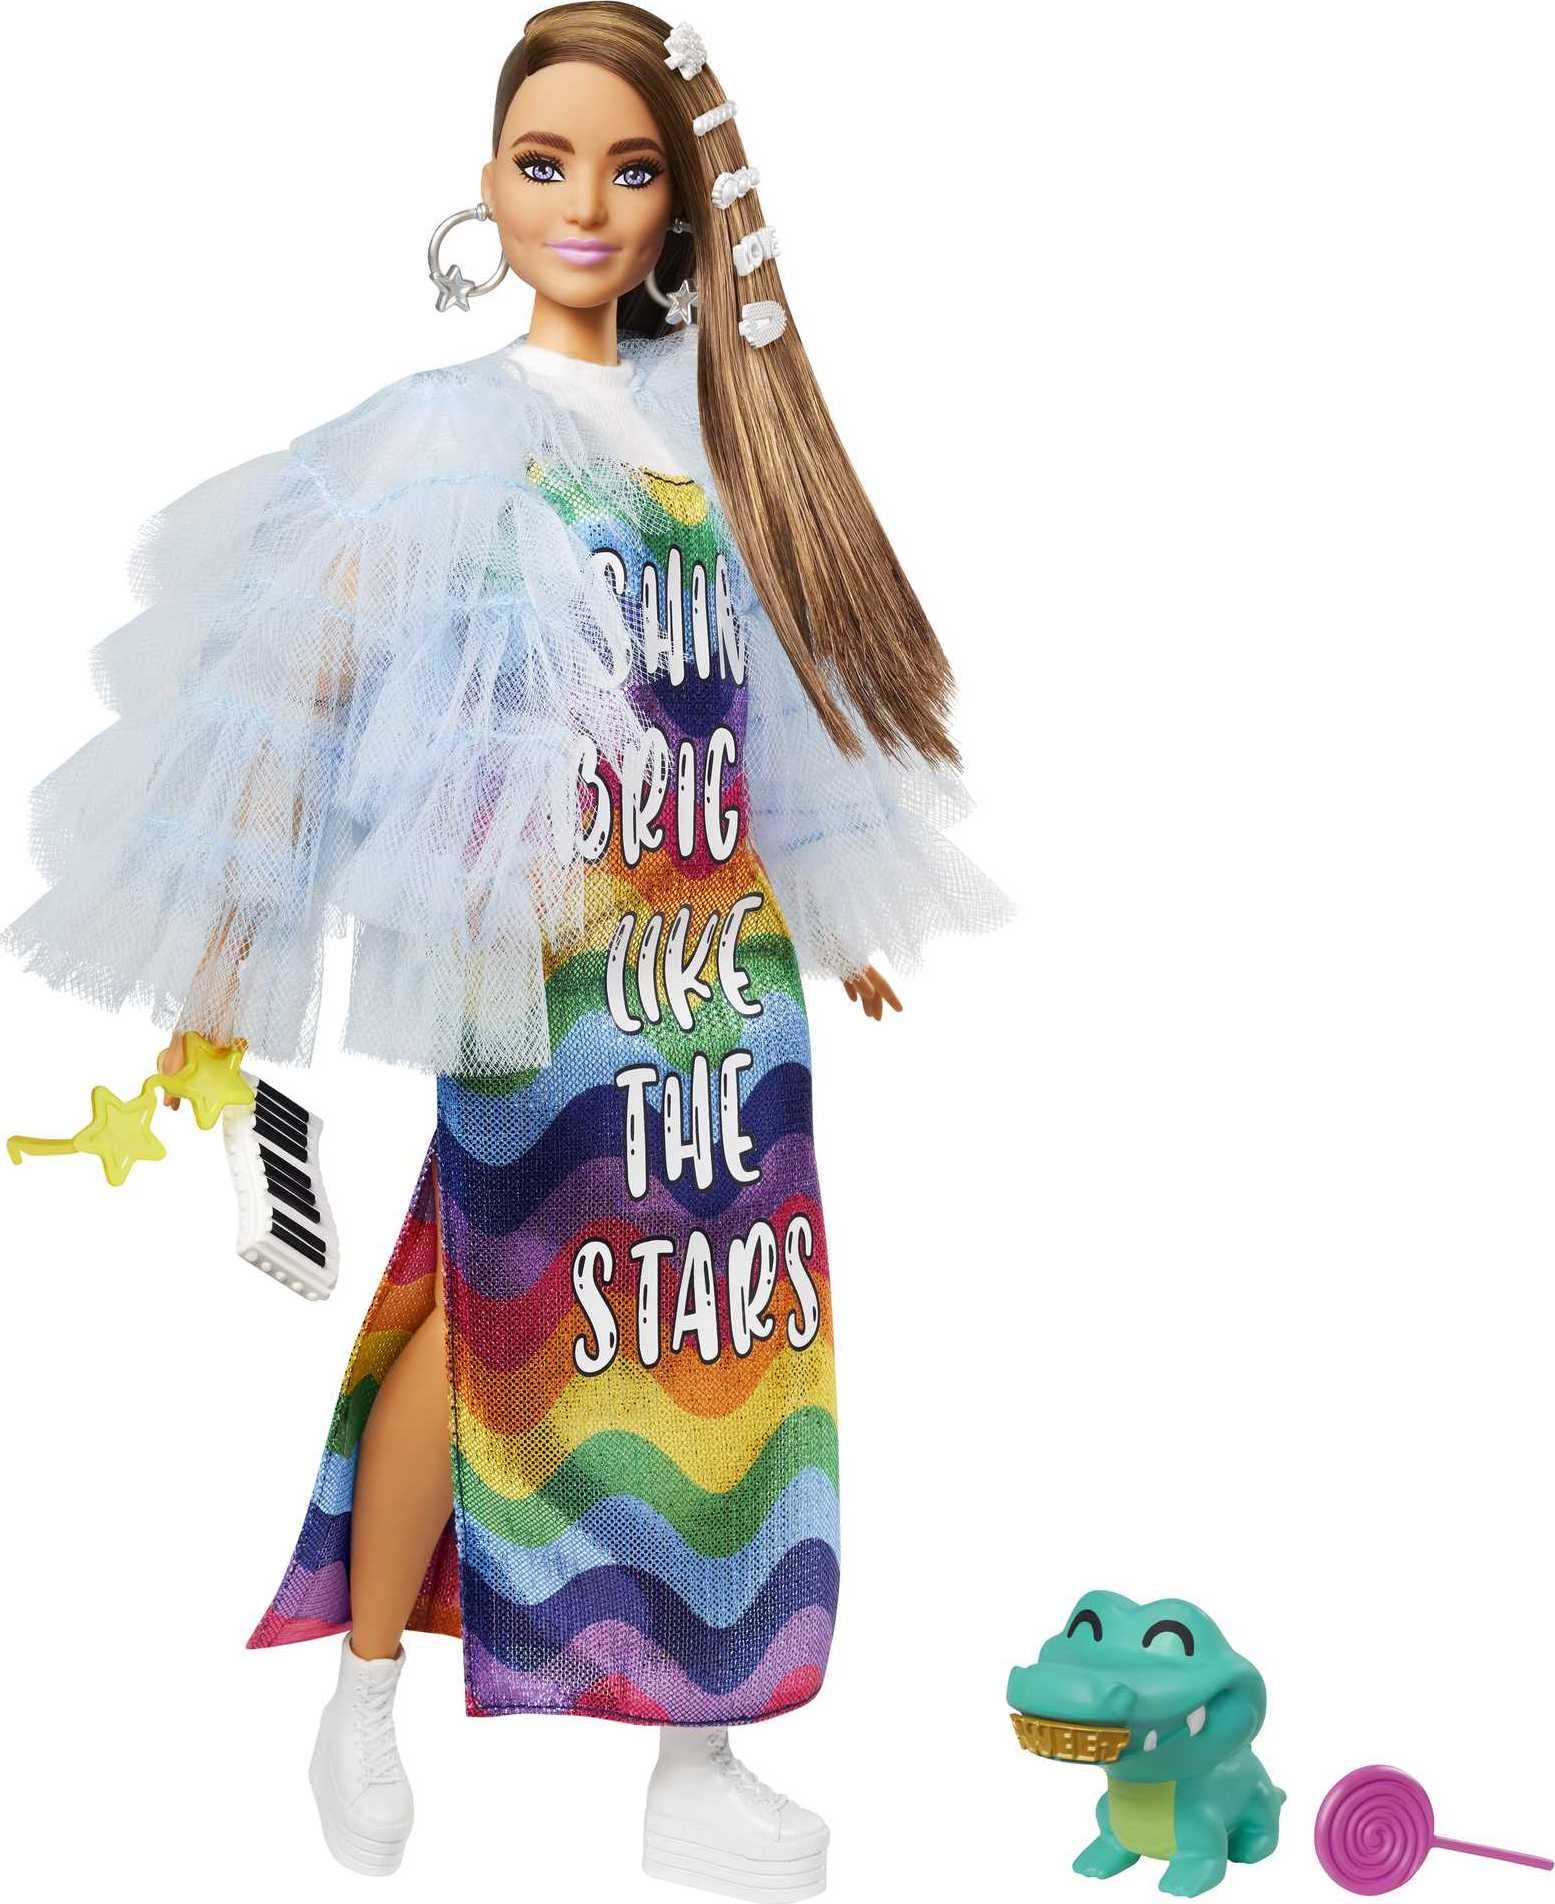 11" Barbie Extra Doll w/ Pet Crocodile, Multi-Colored Dress & Accessories (Long Brunette Hair) $9 + Free Shipping w/ Prime or on $25+